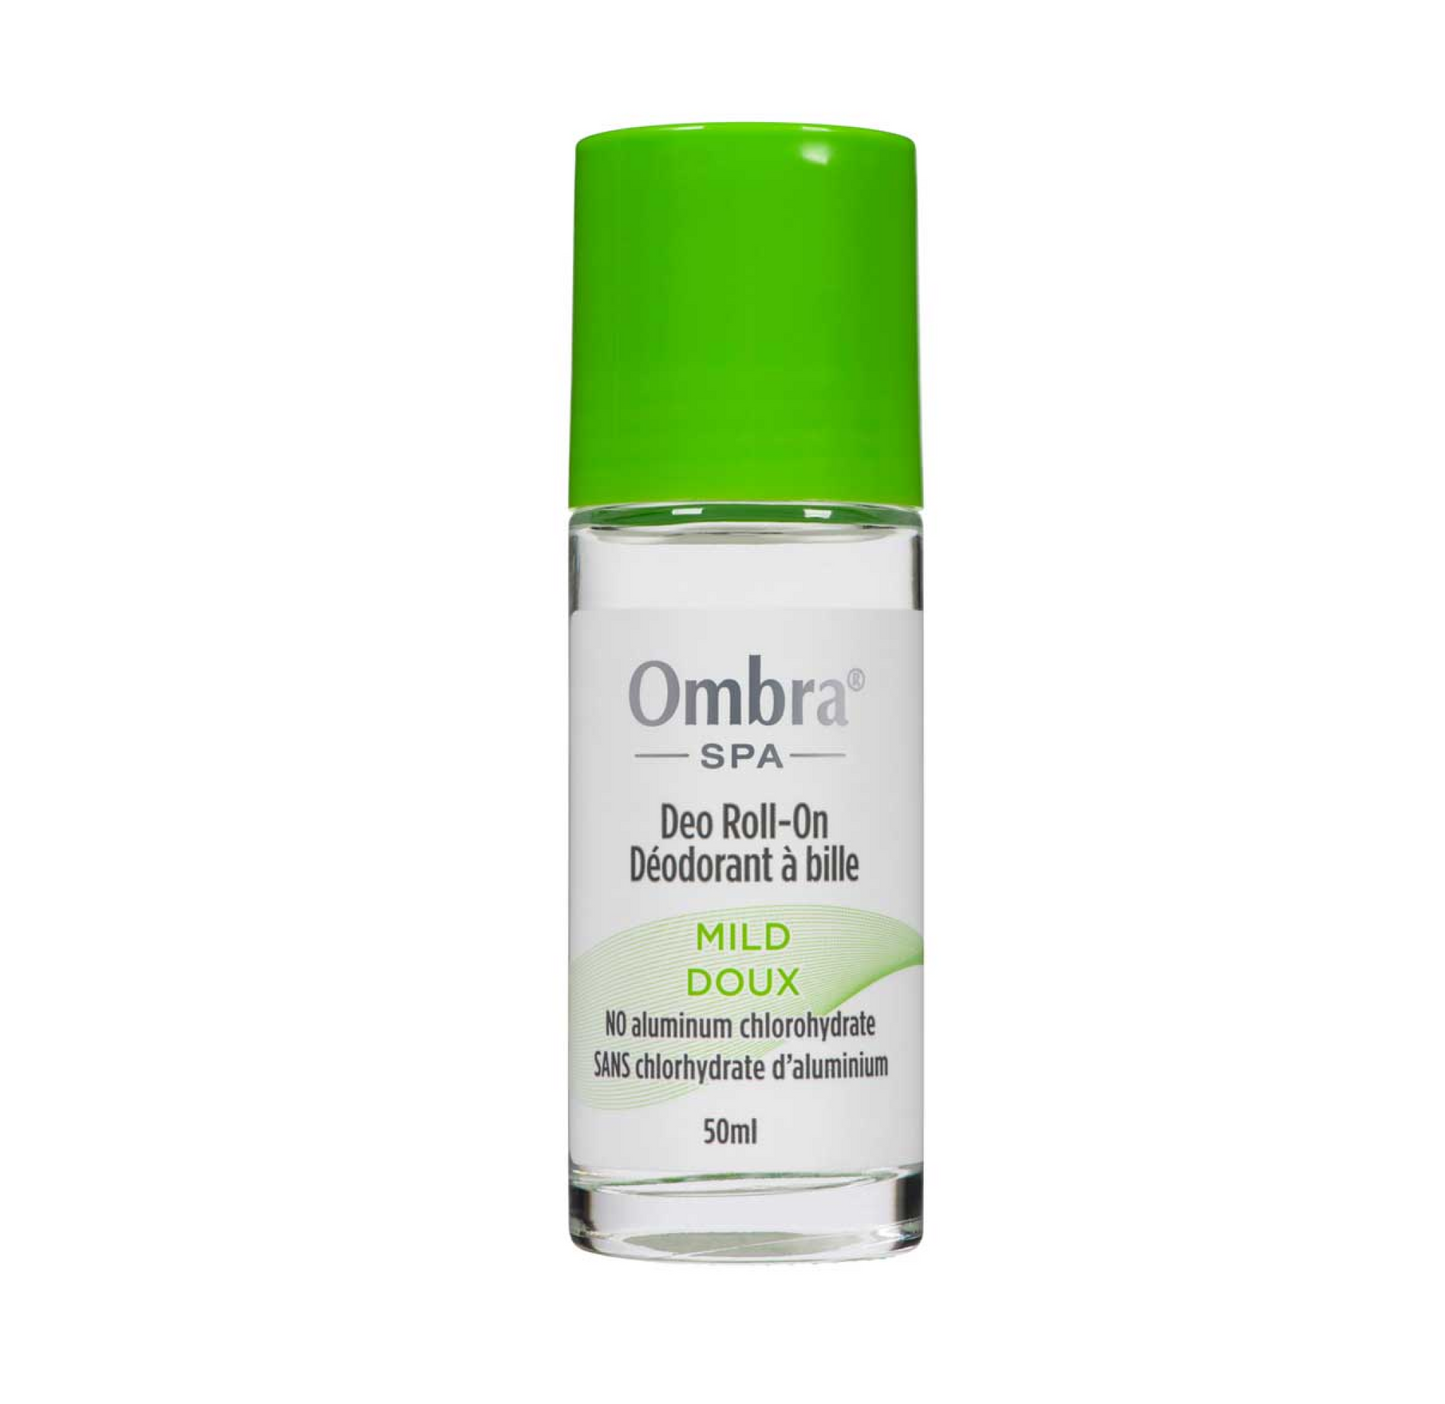 Ombra Spa Mild Deo Roll-On 50ml